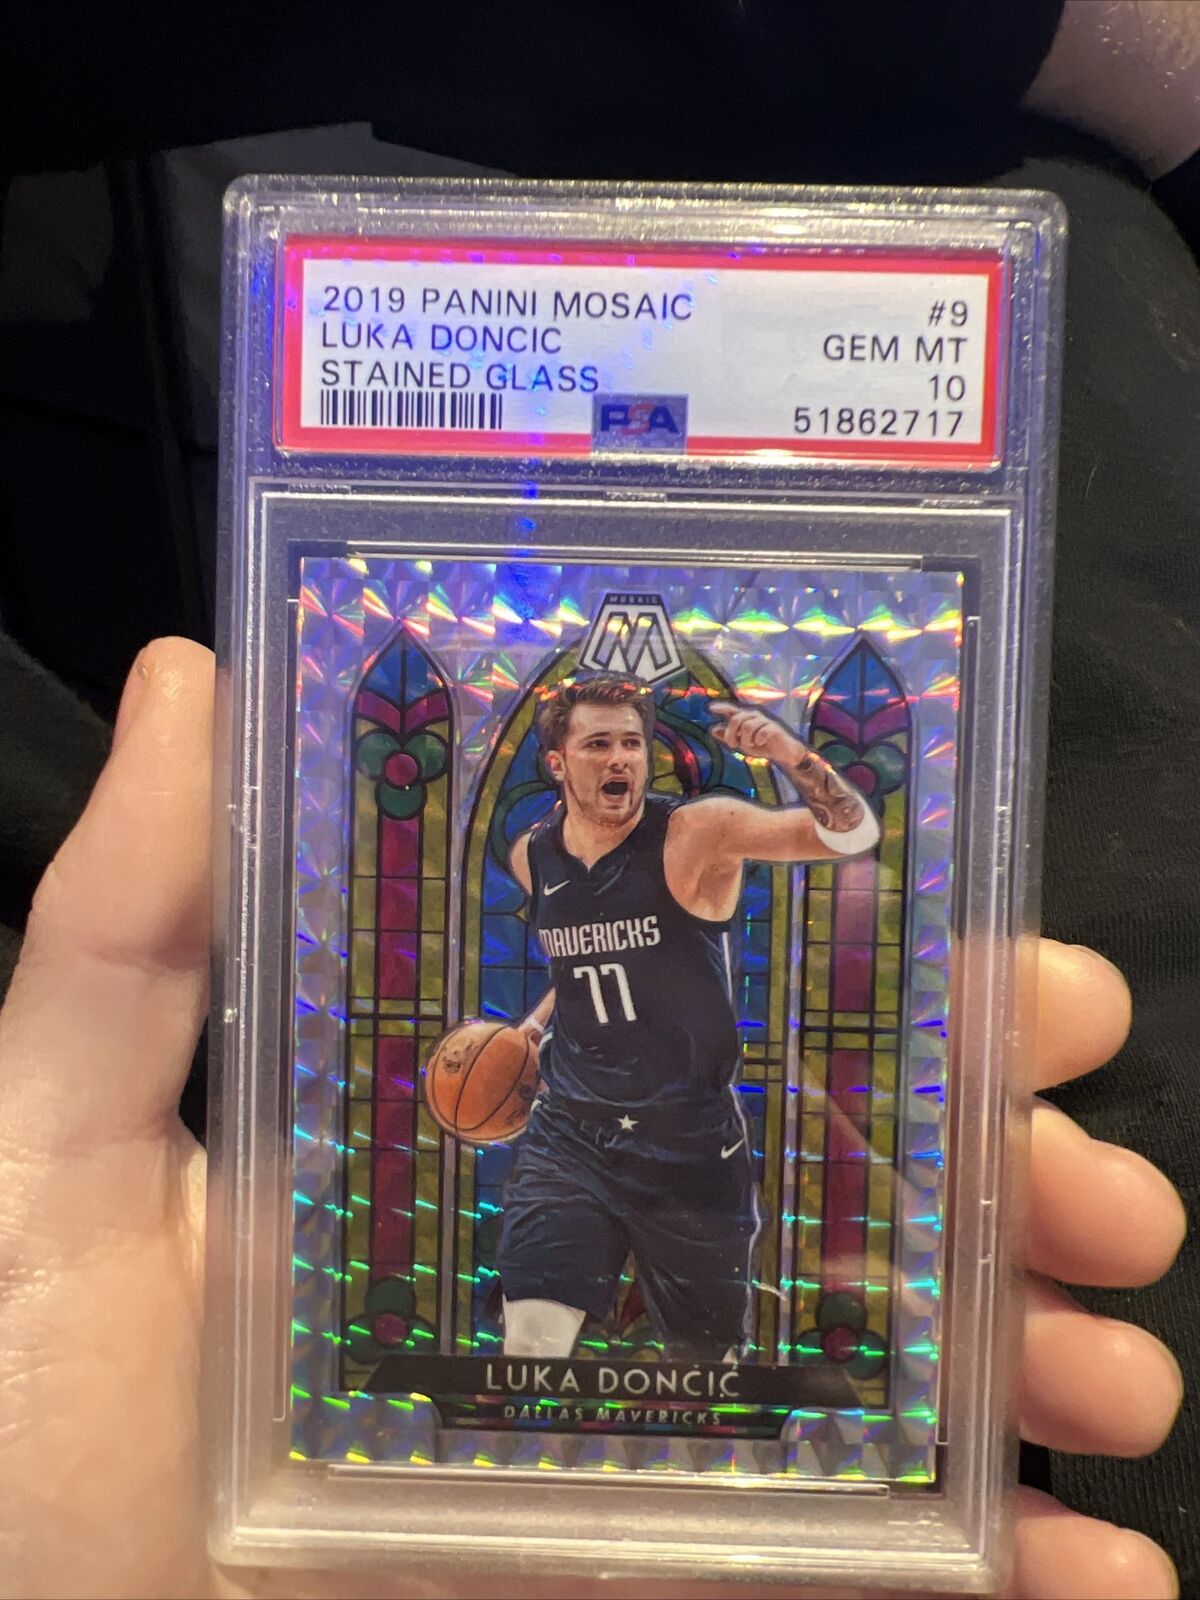 2019 Panini Mosaic Stained Glass Luka Doncic SSP Case Hit PSA 10